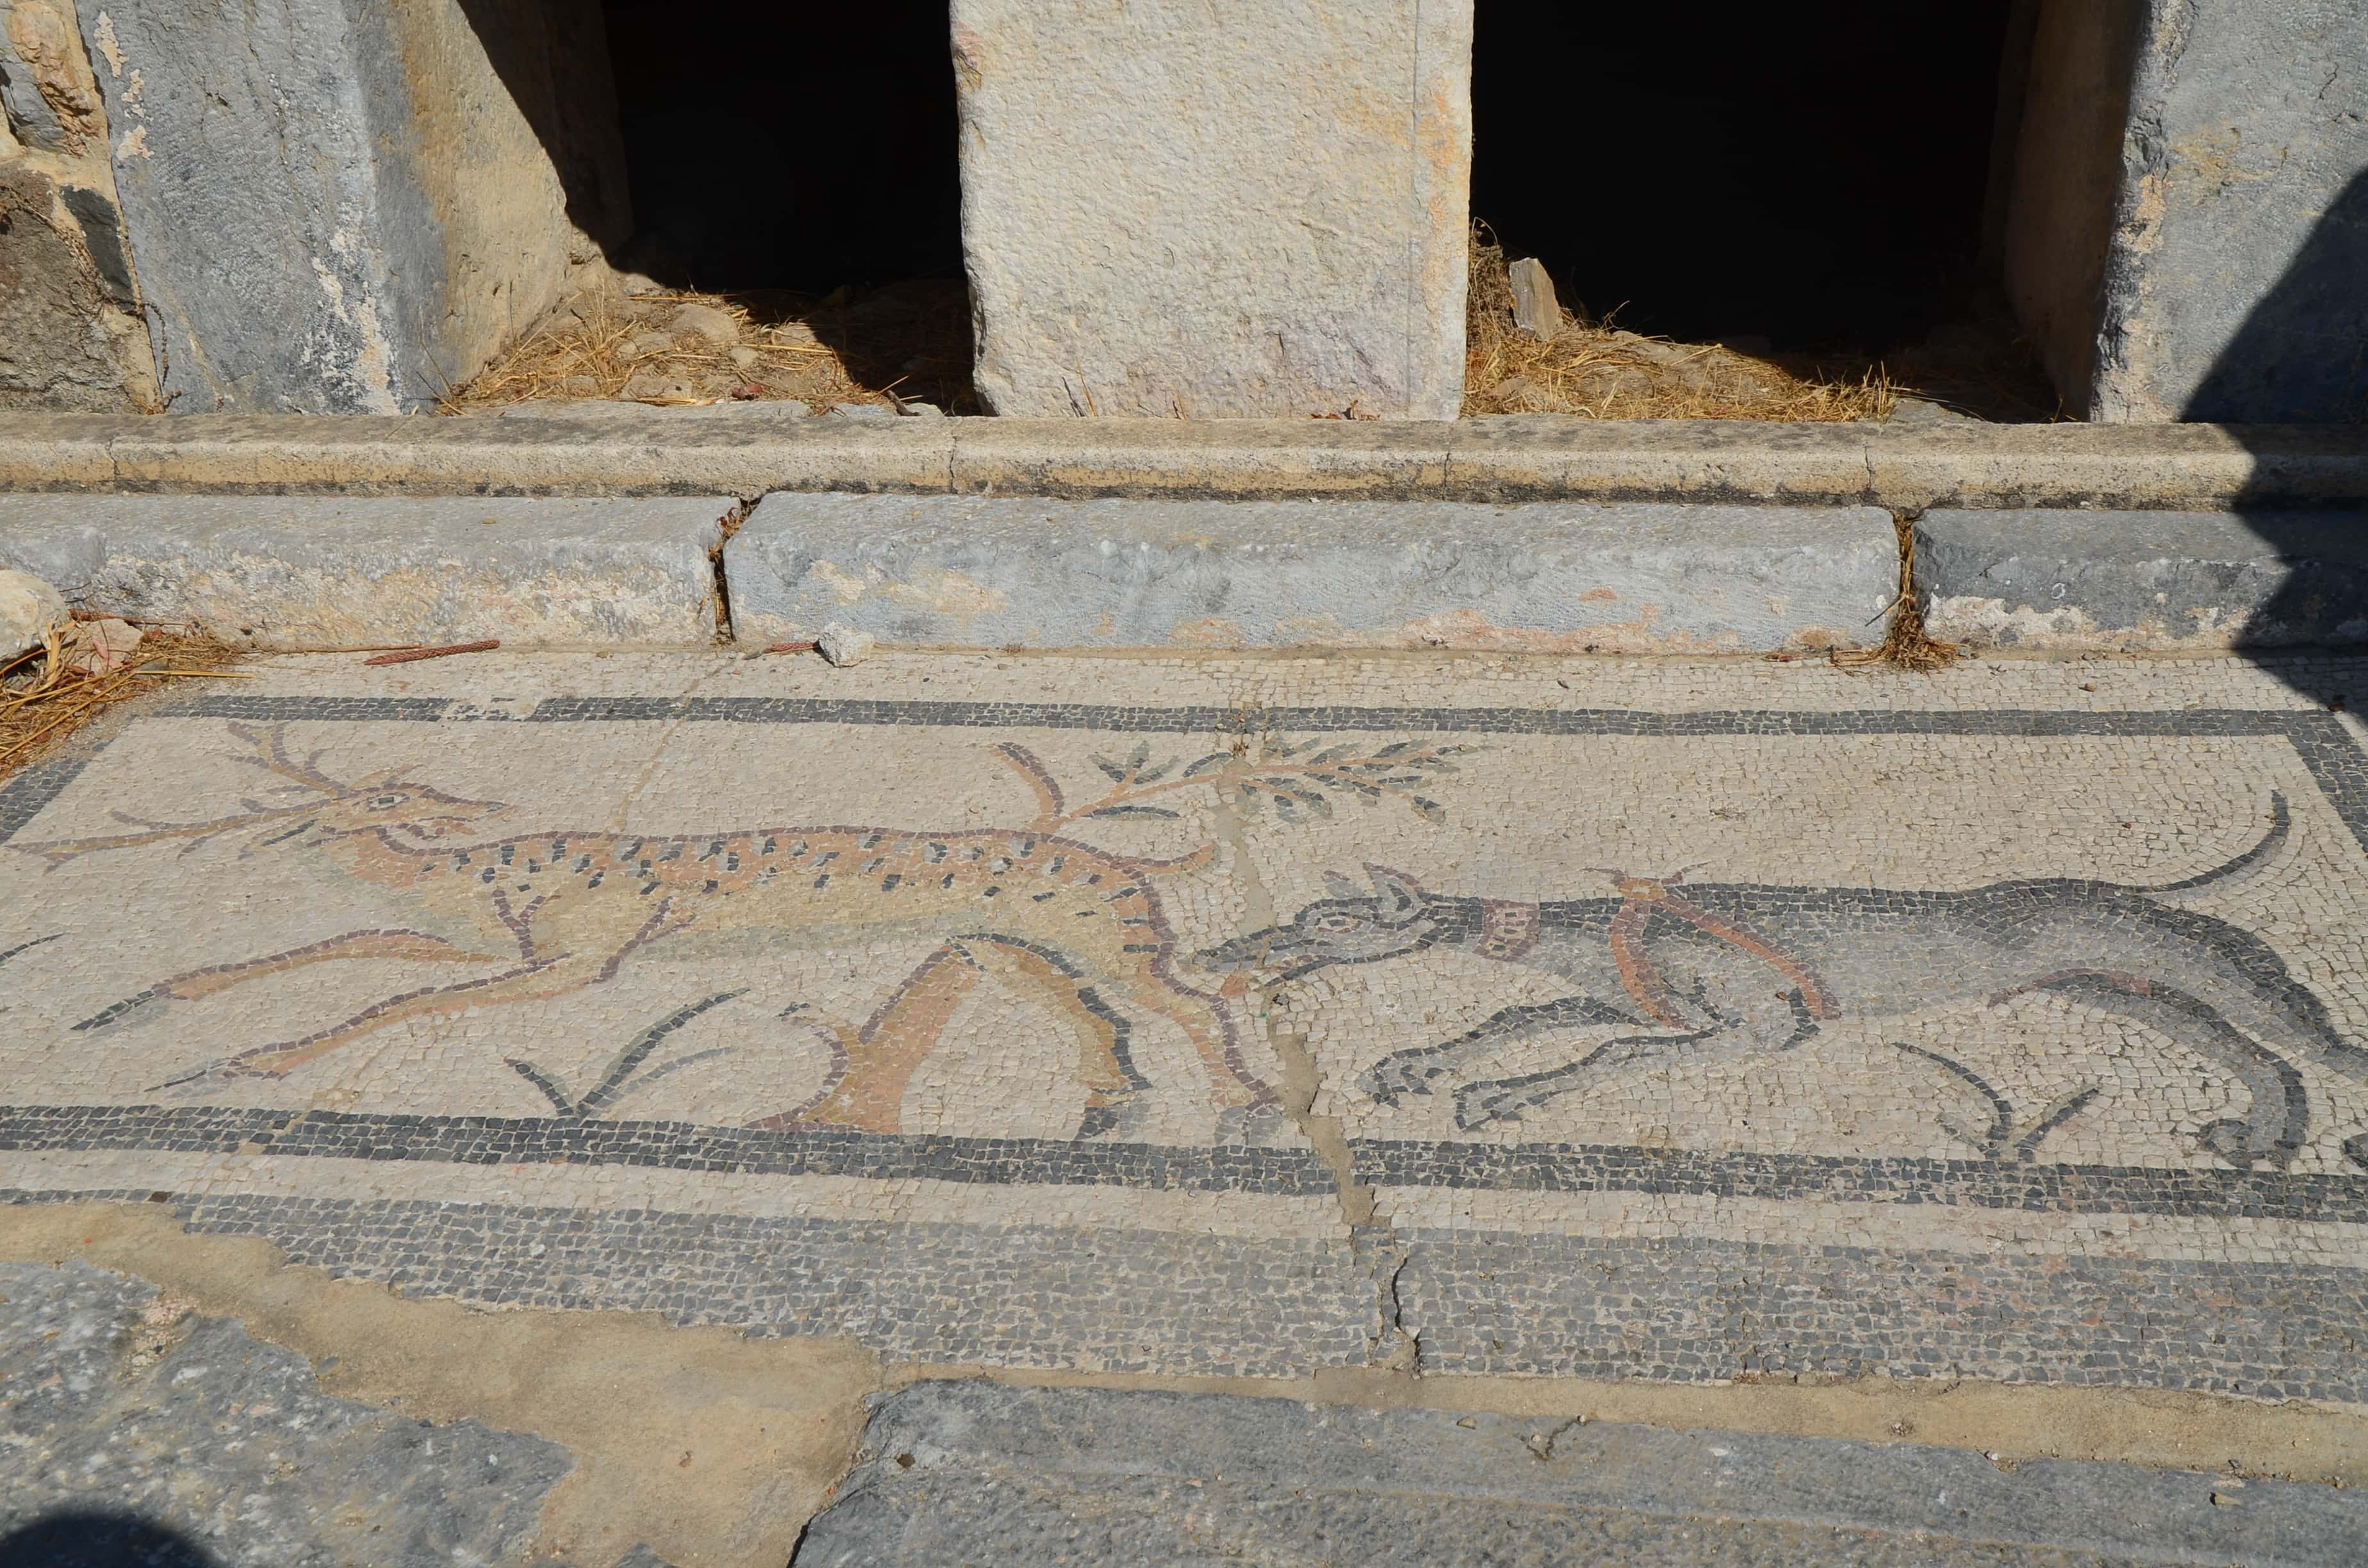 Mosaic at the Roman tombs in Bodrum, Turkey